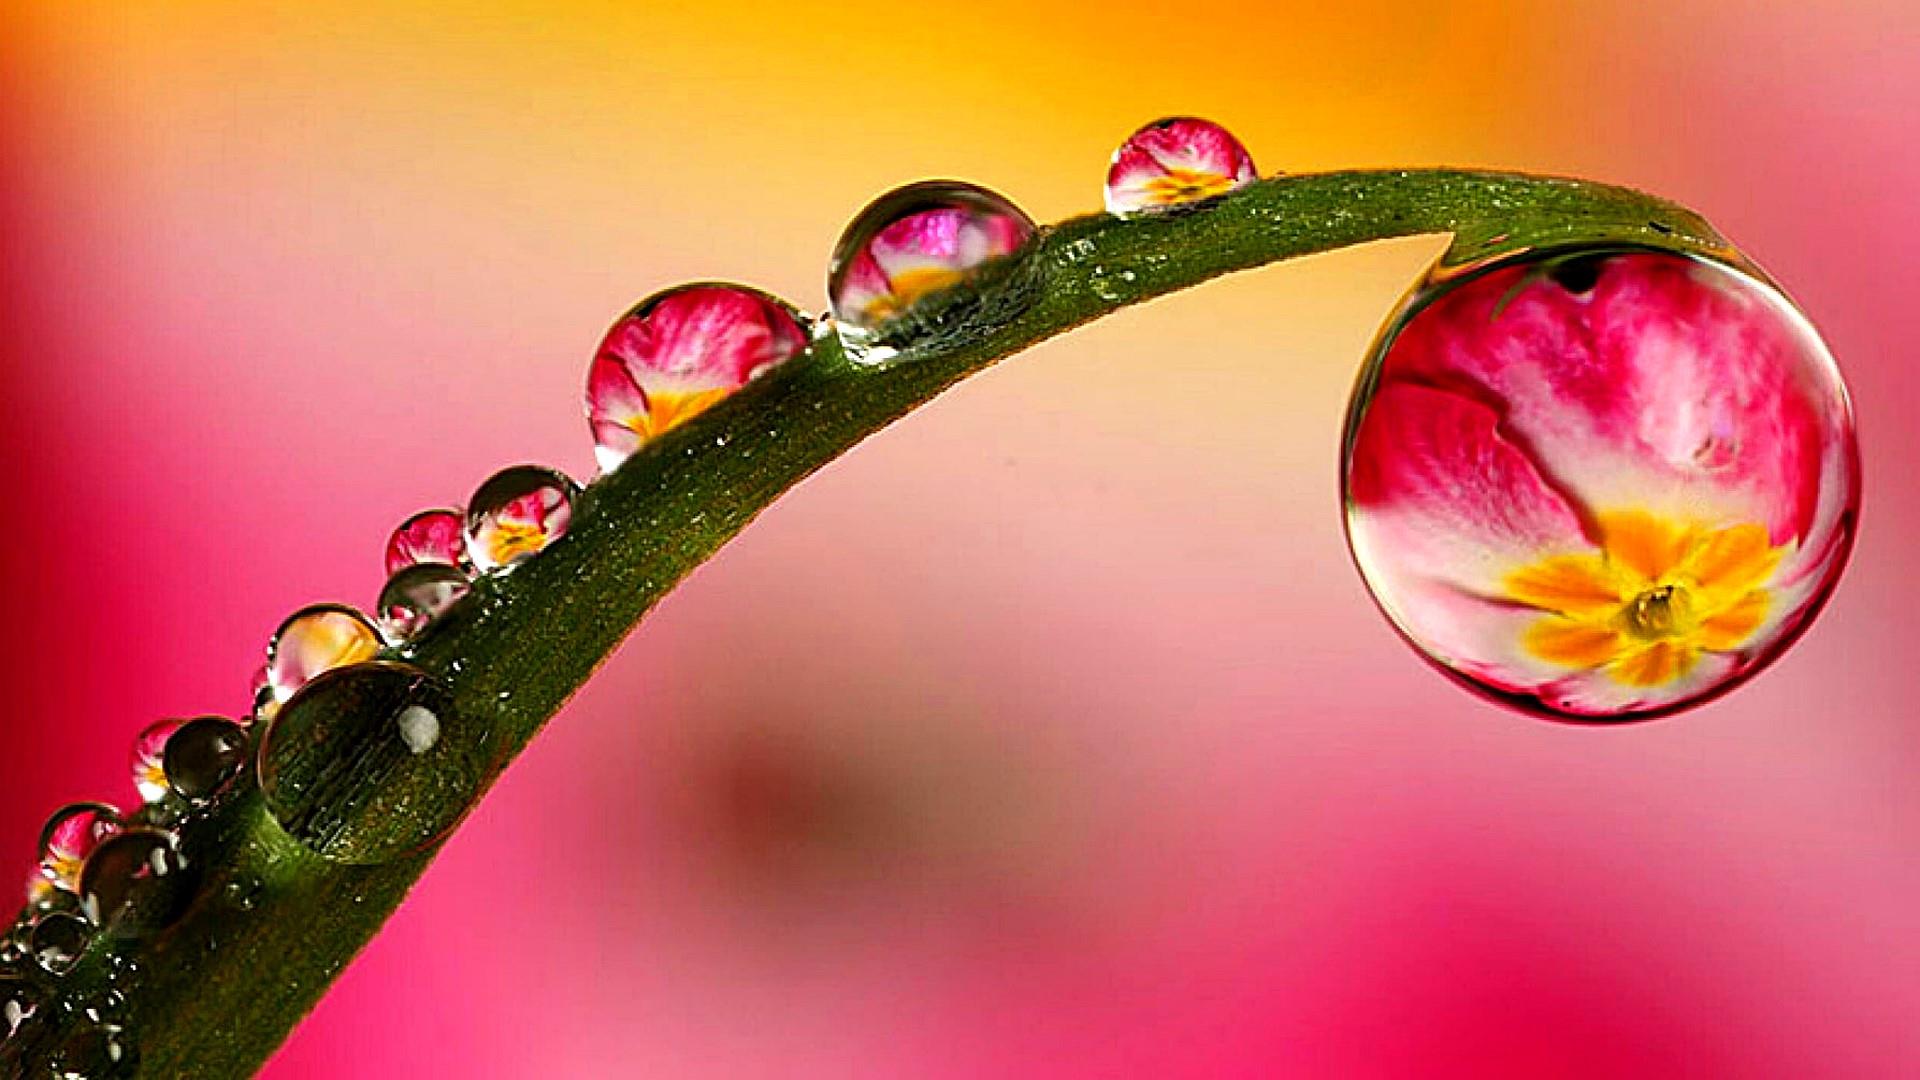 Drops Of Water On Green Leaf Macro Photography Hd Wallpapers For ...